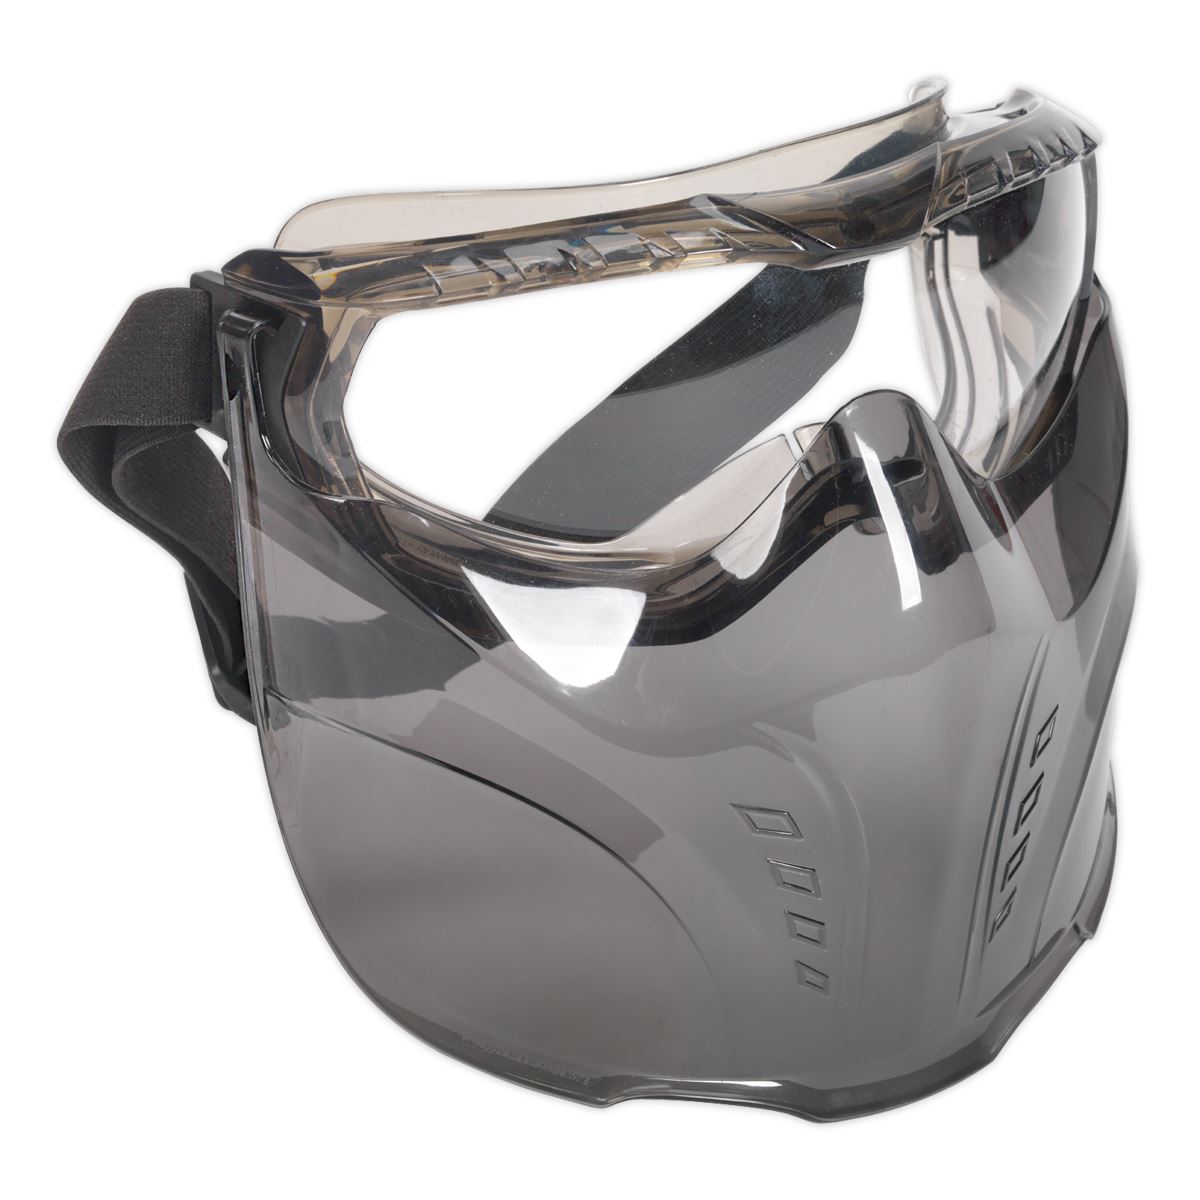 Sealey Safety Goggles With Detachable Face Shield